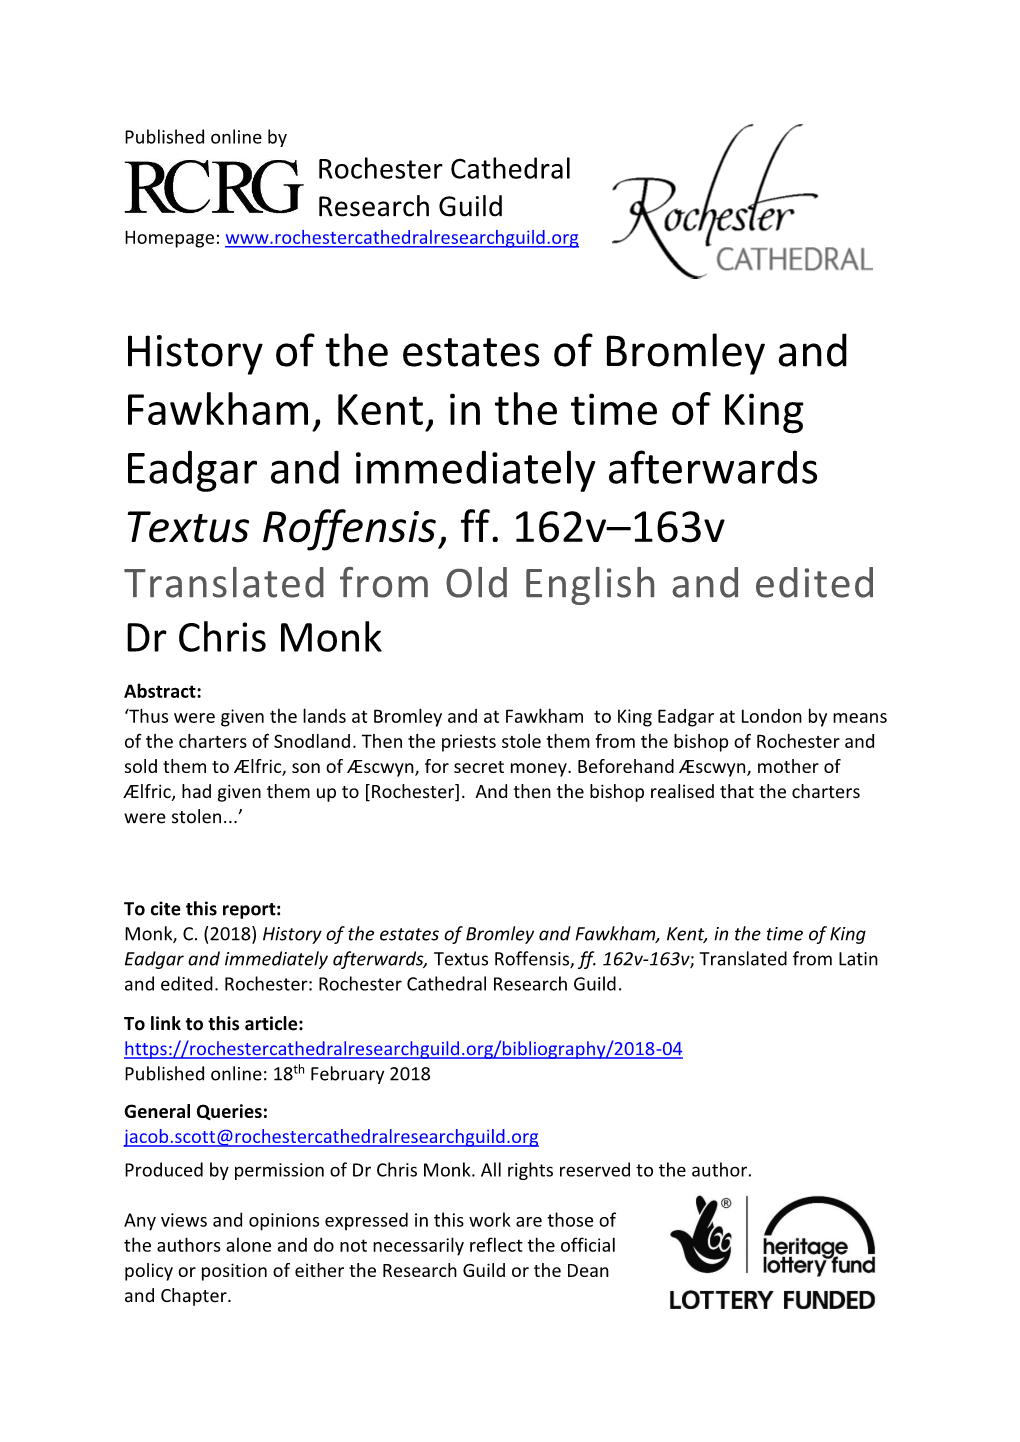 History of the Estates of Bromley and Fawkham, Kent, in the Time of King Eadgar and Immediately Afterwards Textus Roffensis, Ff